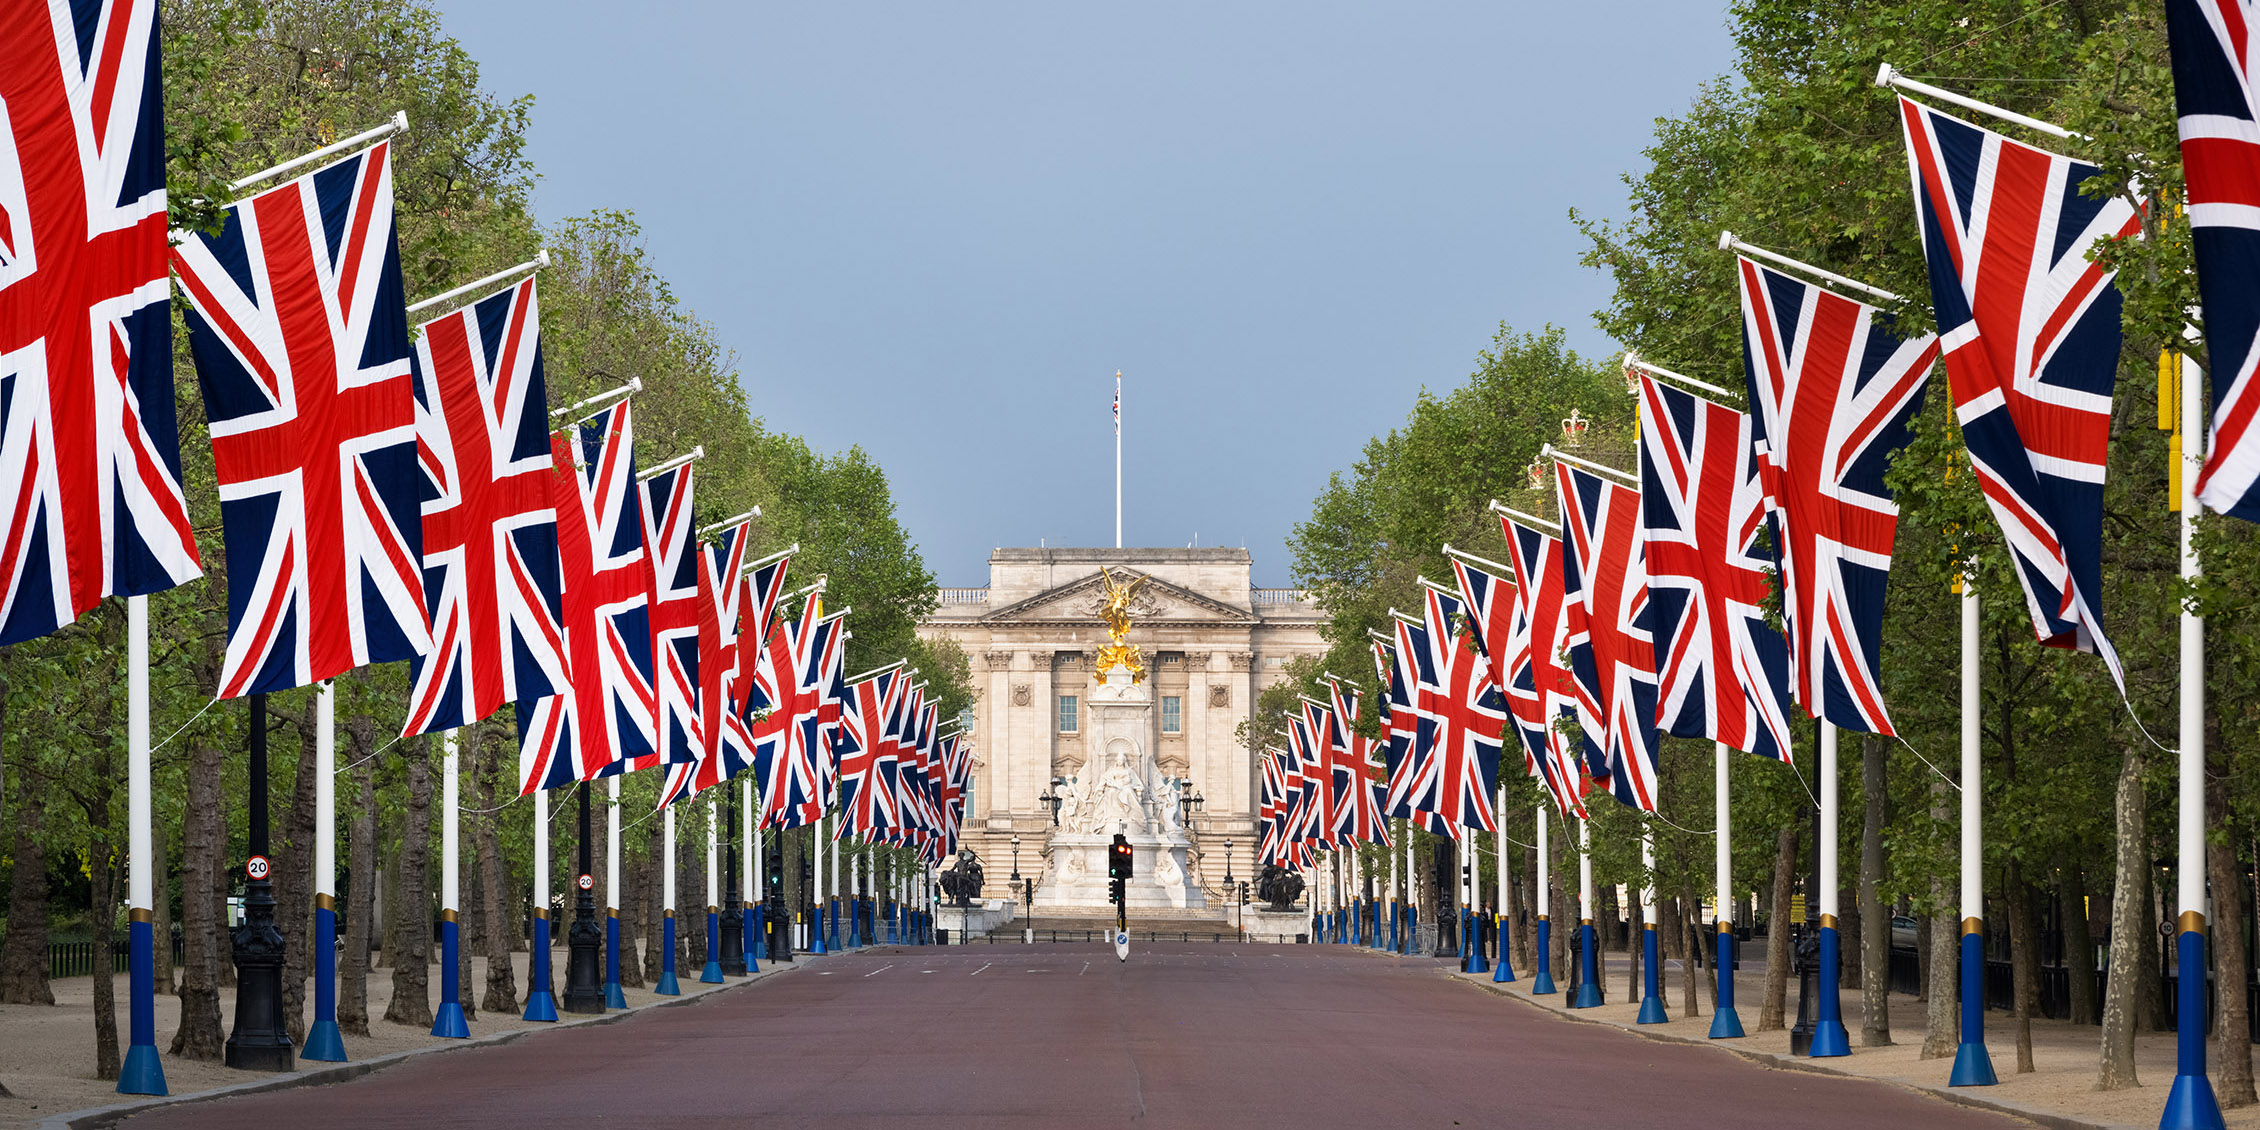 Photograph of London coronation flags on the Mall